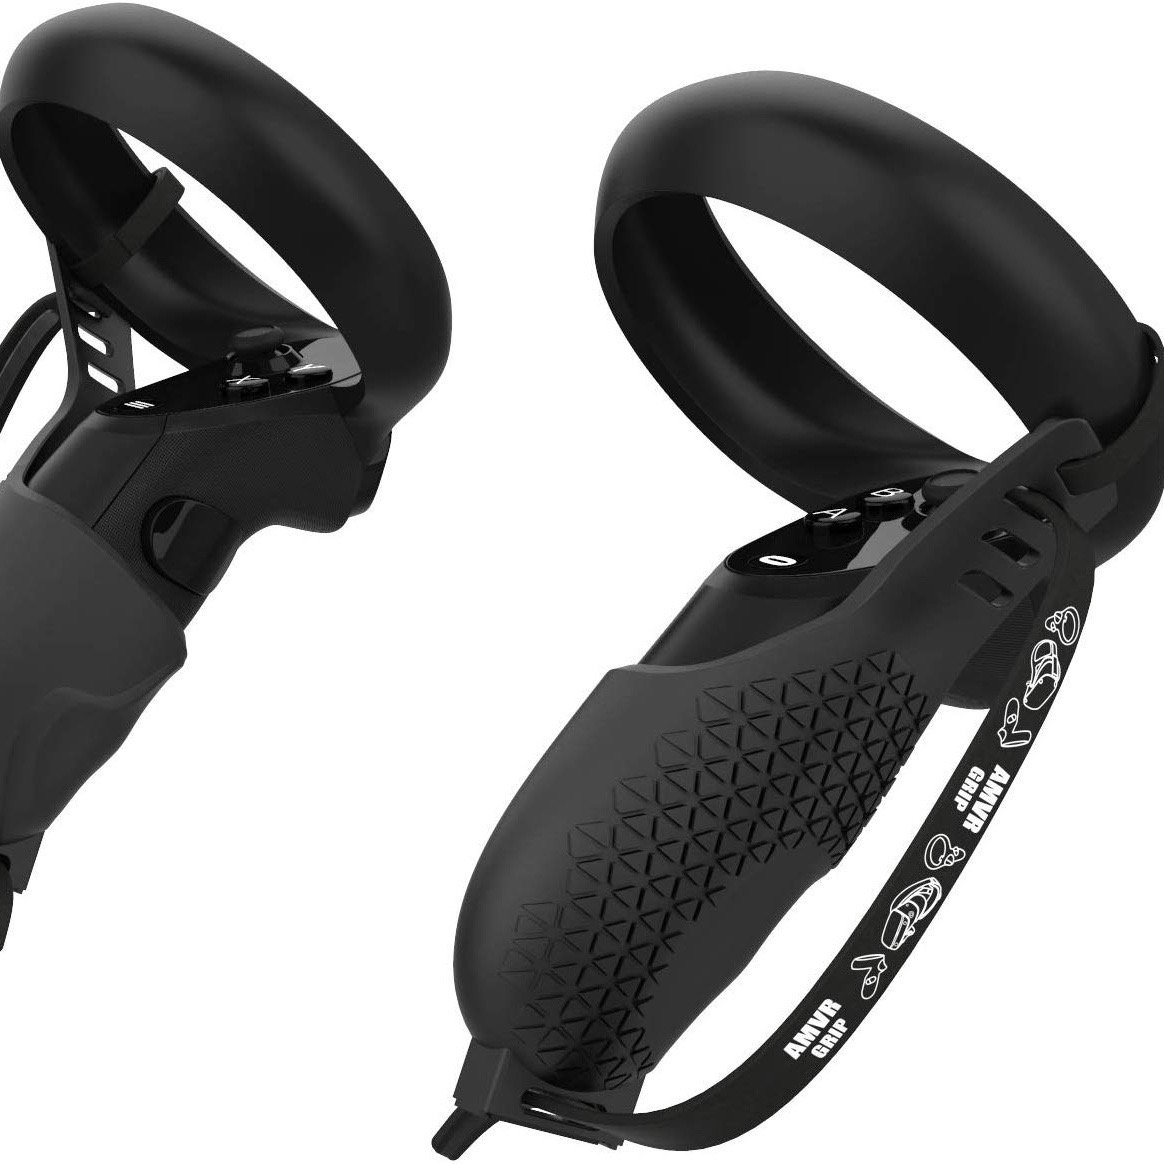 AMVR Oculus Touch Grips Product Image